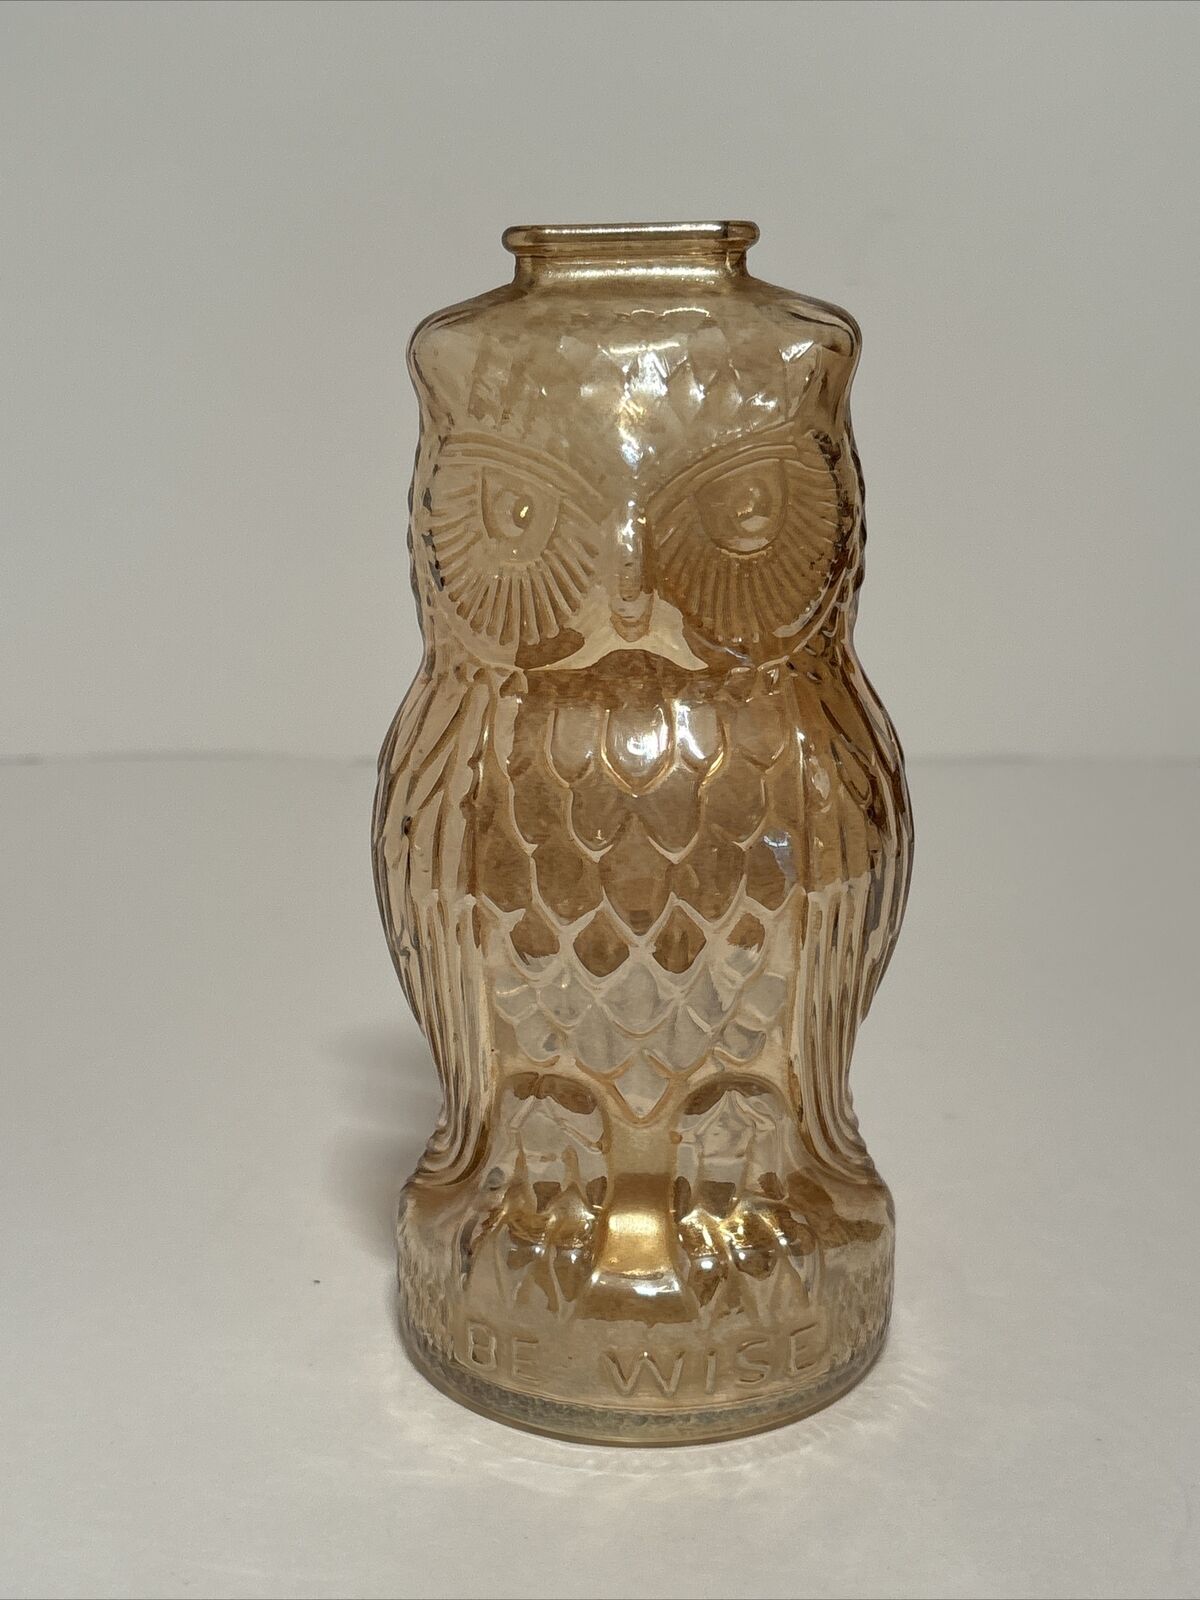 Vintage Carnival Glass Marigold Iridescent Owl Bank “Be Wise”